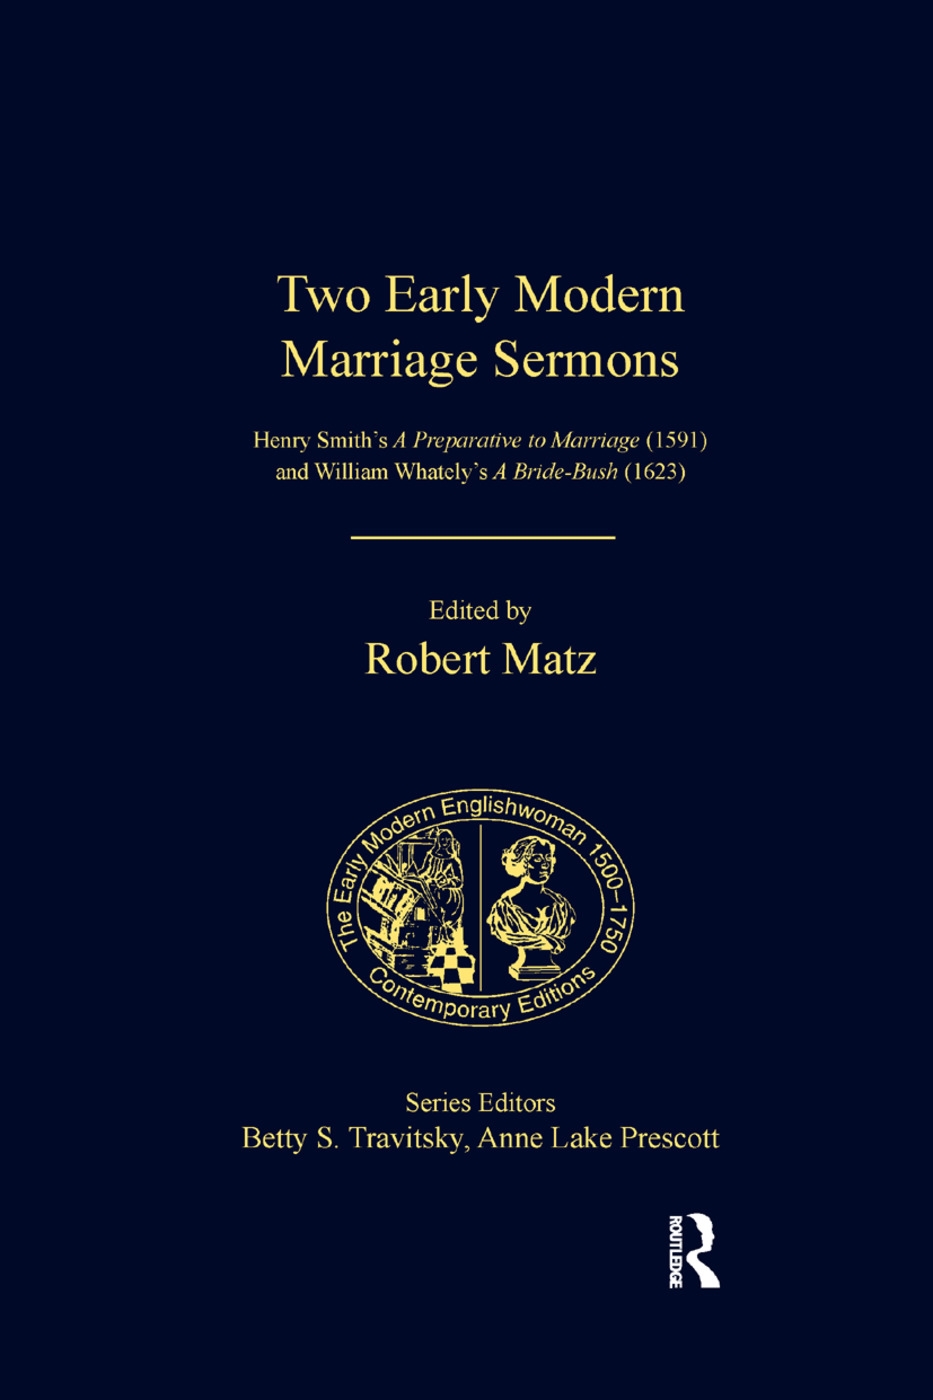 Two Early Modern Marriage Sermons: Henry Smith’’s A Preparative to Marriage (1591) and William Whately’’s A Bride-Bush (1623)